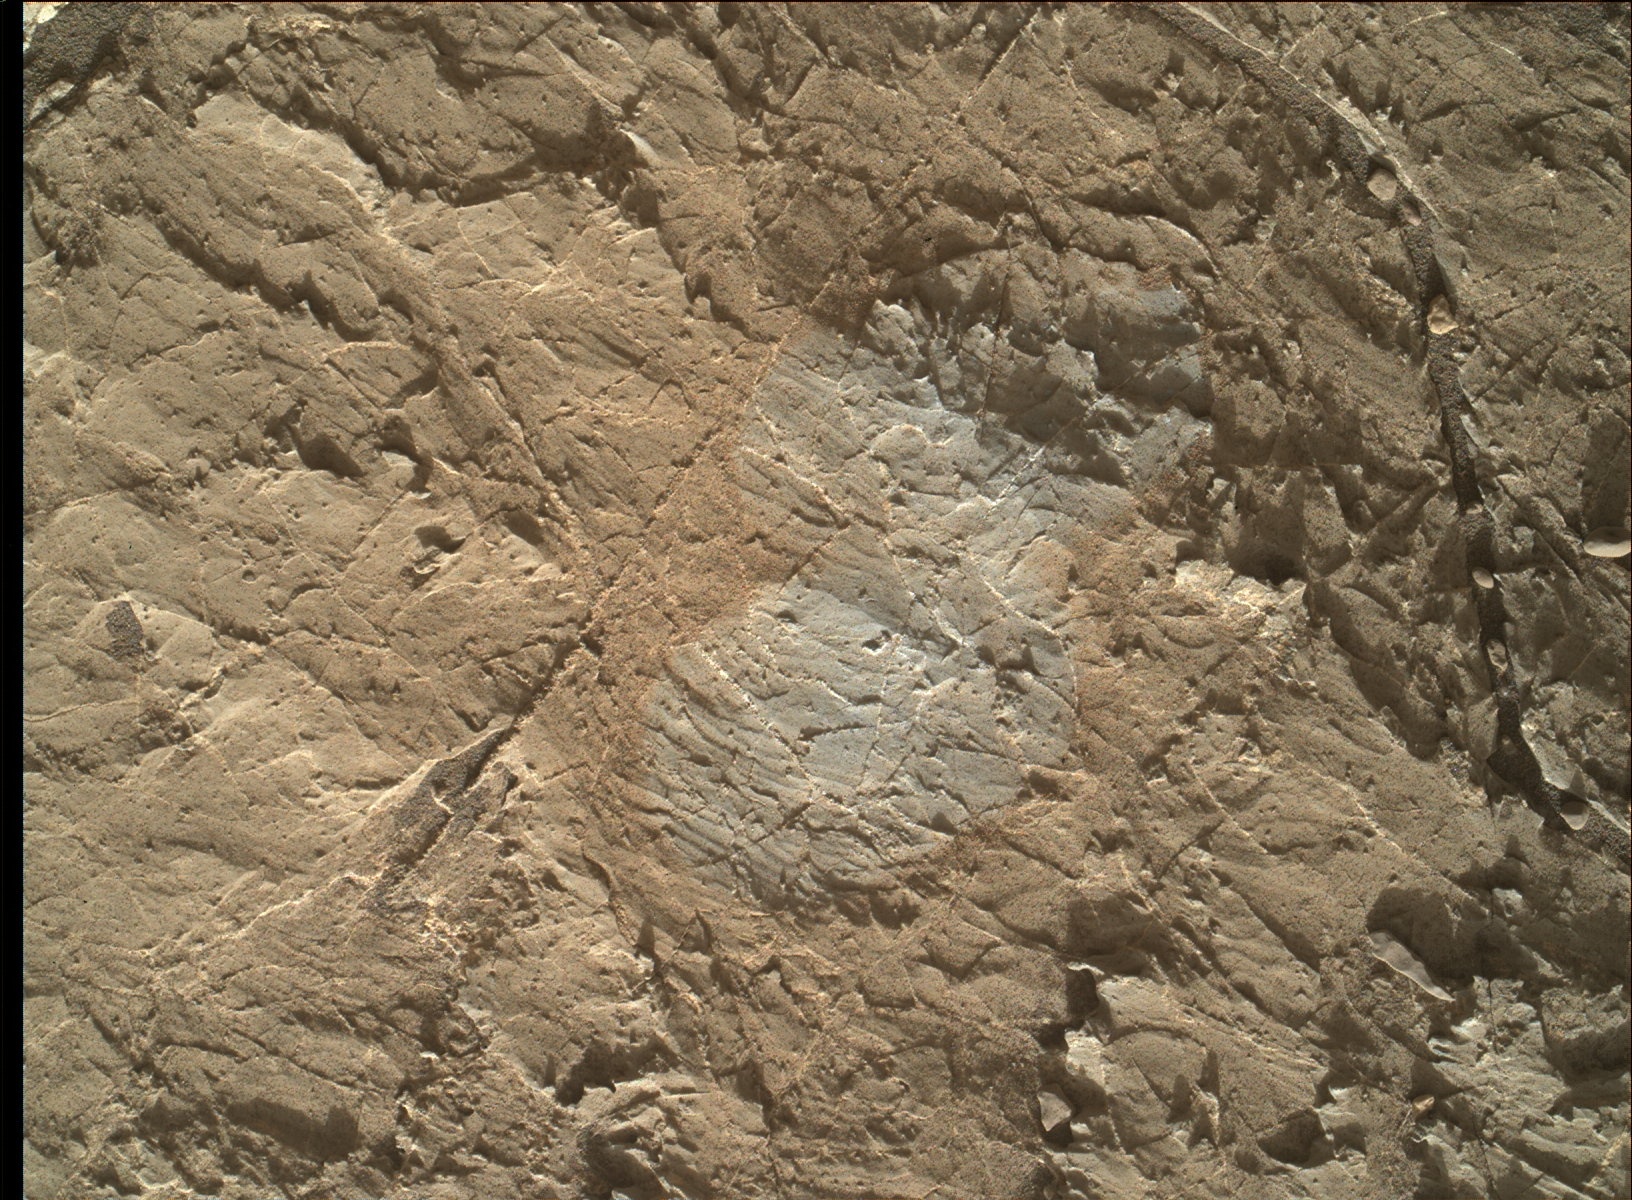 Nasa's Mars rover Curiosity acquired this image using its Mars Hand Lens Imager (MAHLI) on Sol 1973